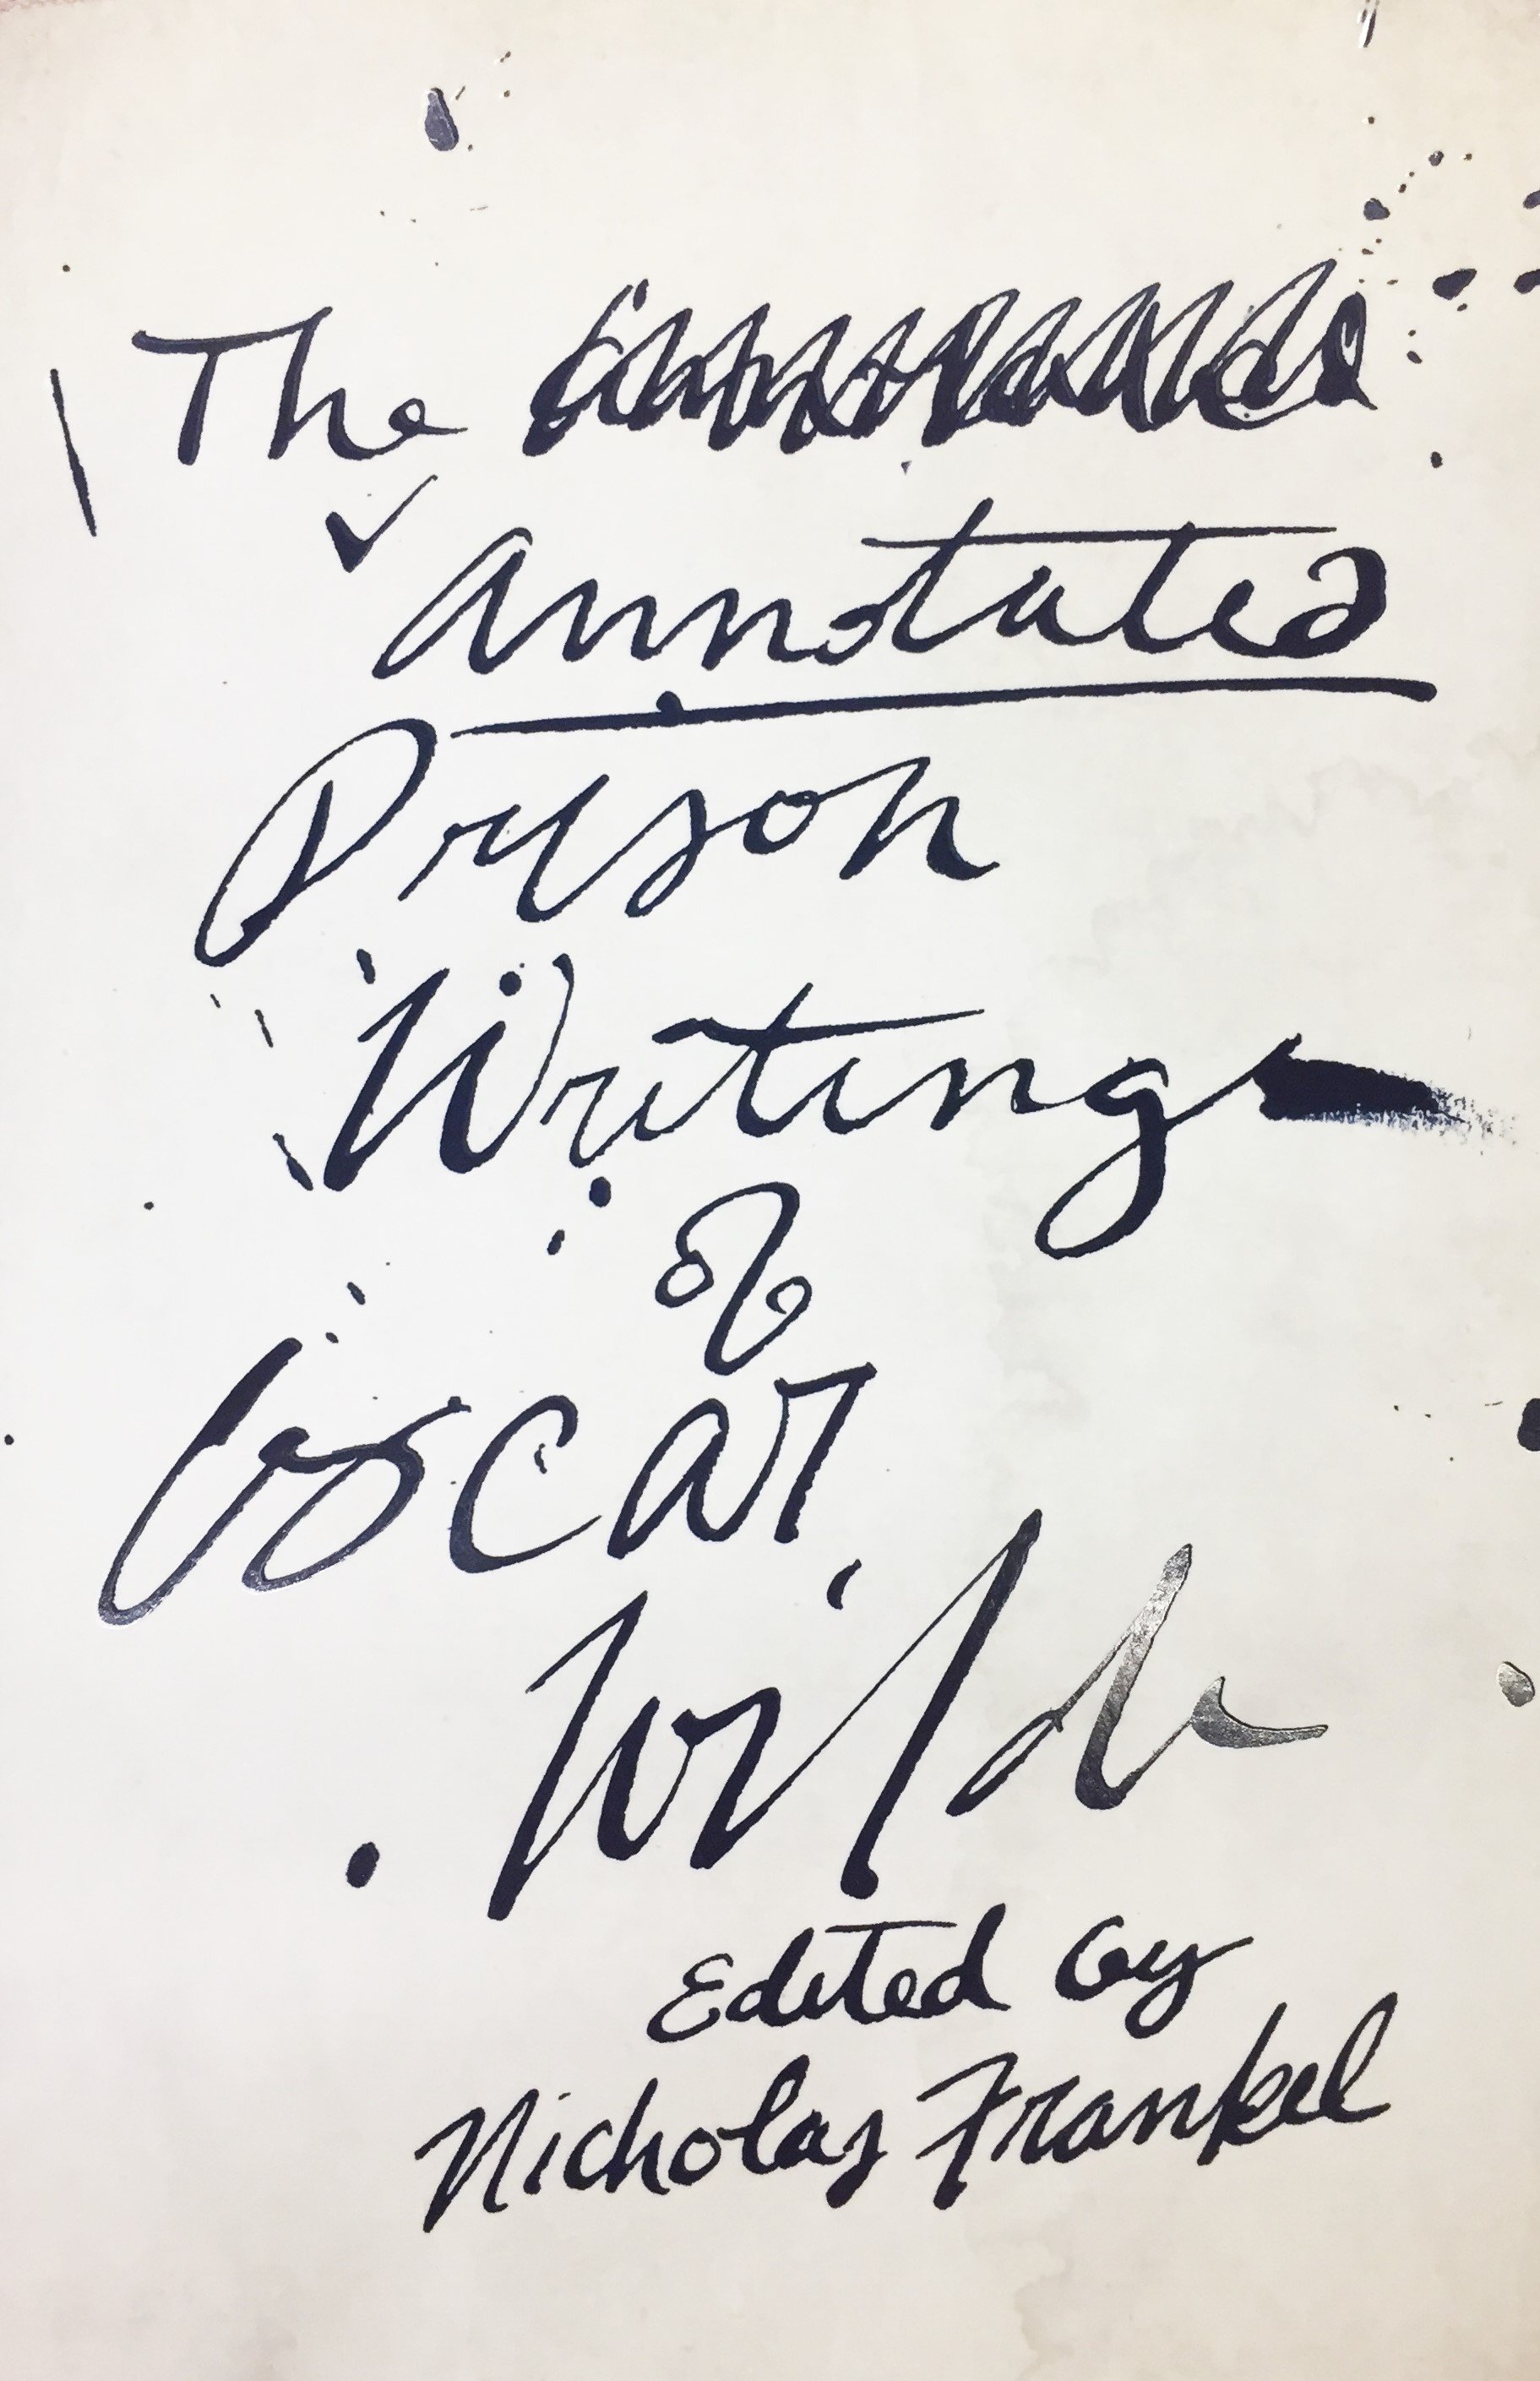 An ink-splattered page that reads in messy handwriting "The Annotated Writings of Oscar Wild, Edited by Nicholas Frankel".